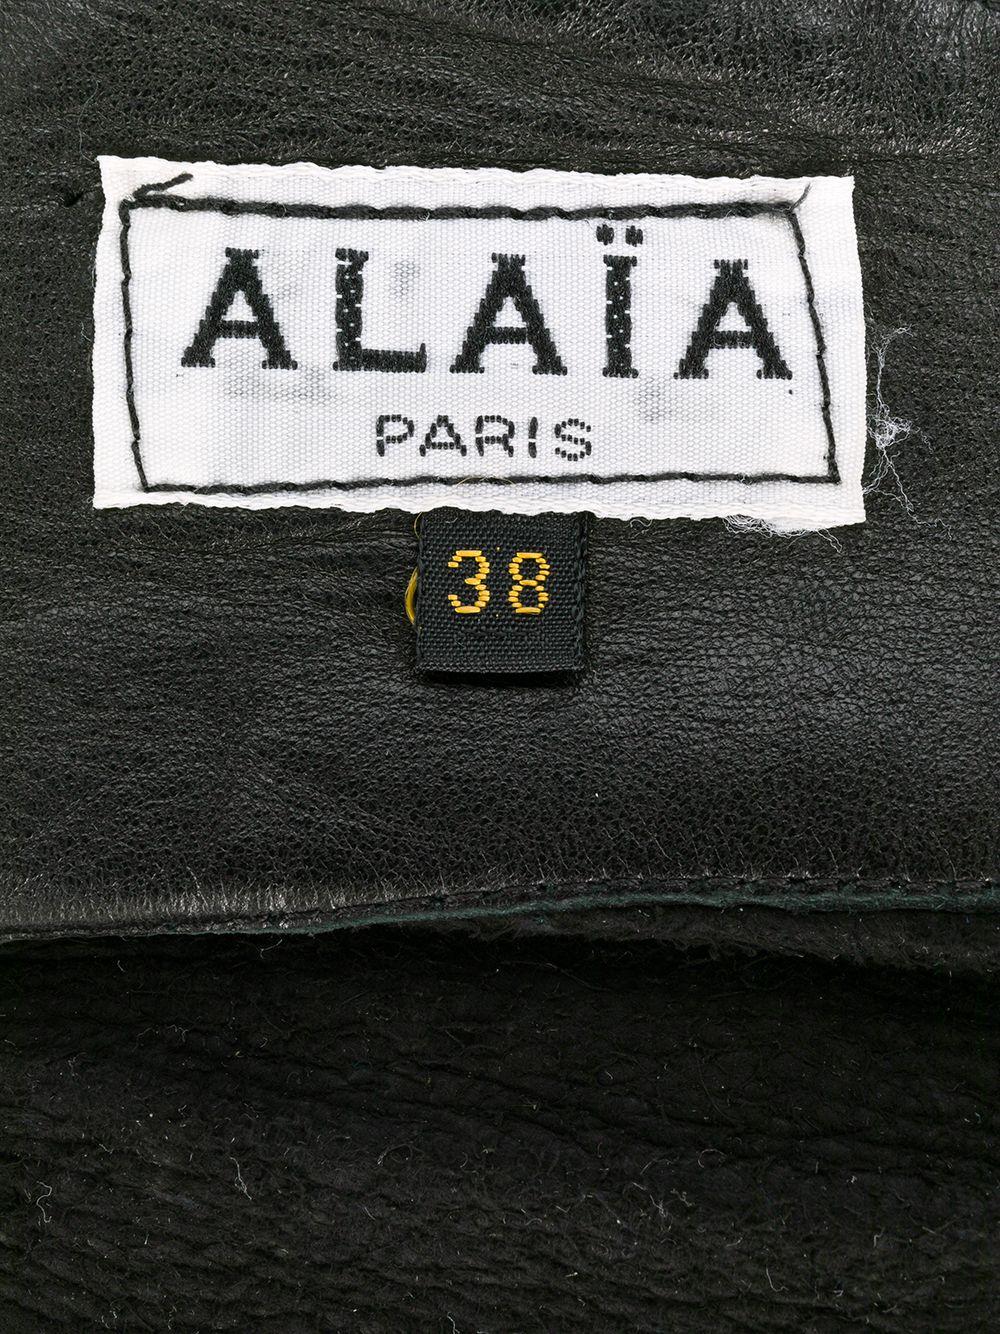 Azzedine Alaïa black soft lamb leather wide corset belt featuring center front pleats, a center back buckle, and an internal logo label. Circa 1990.
We attached some photos with the belt worn ( look grey but it is really black as per 1st photo)
In